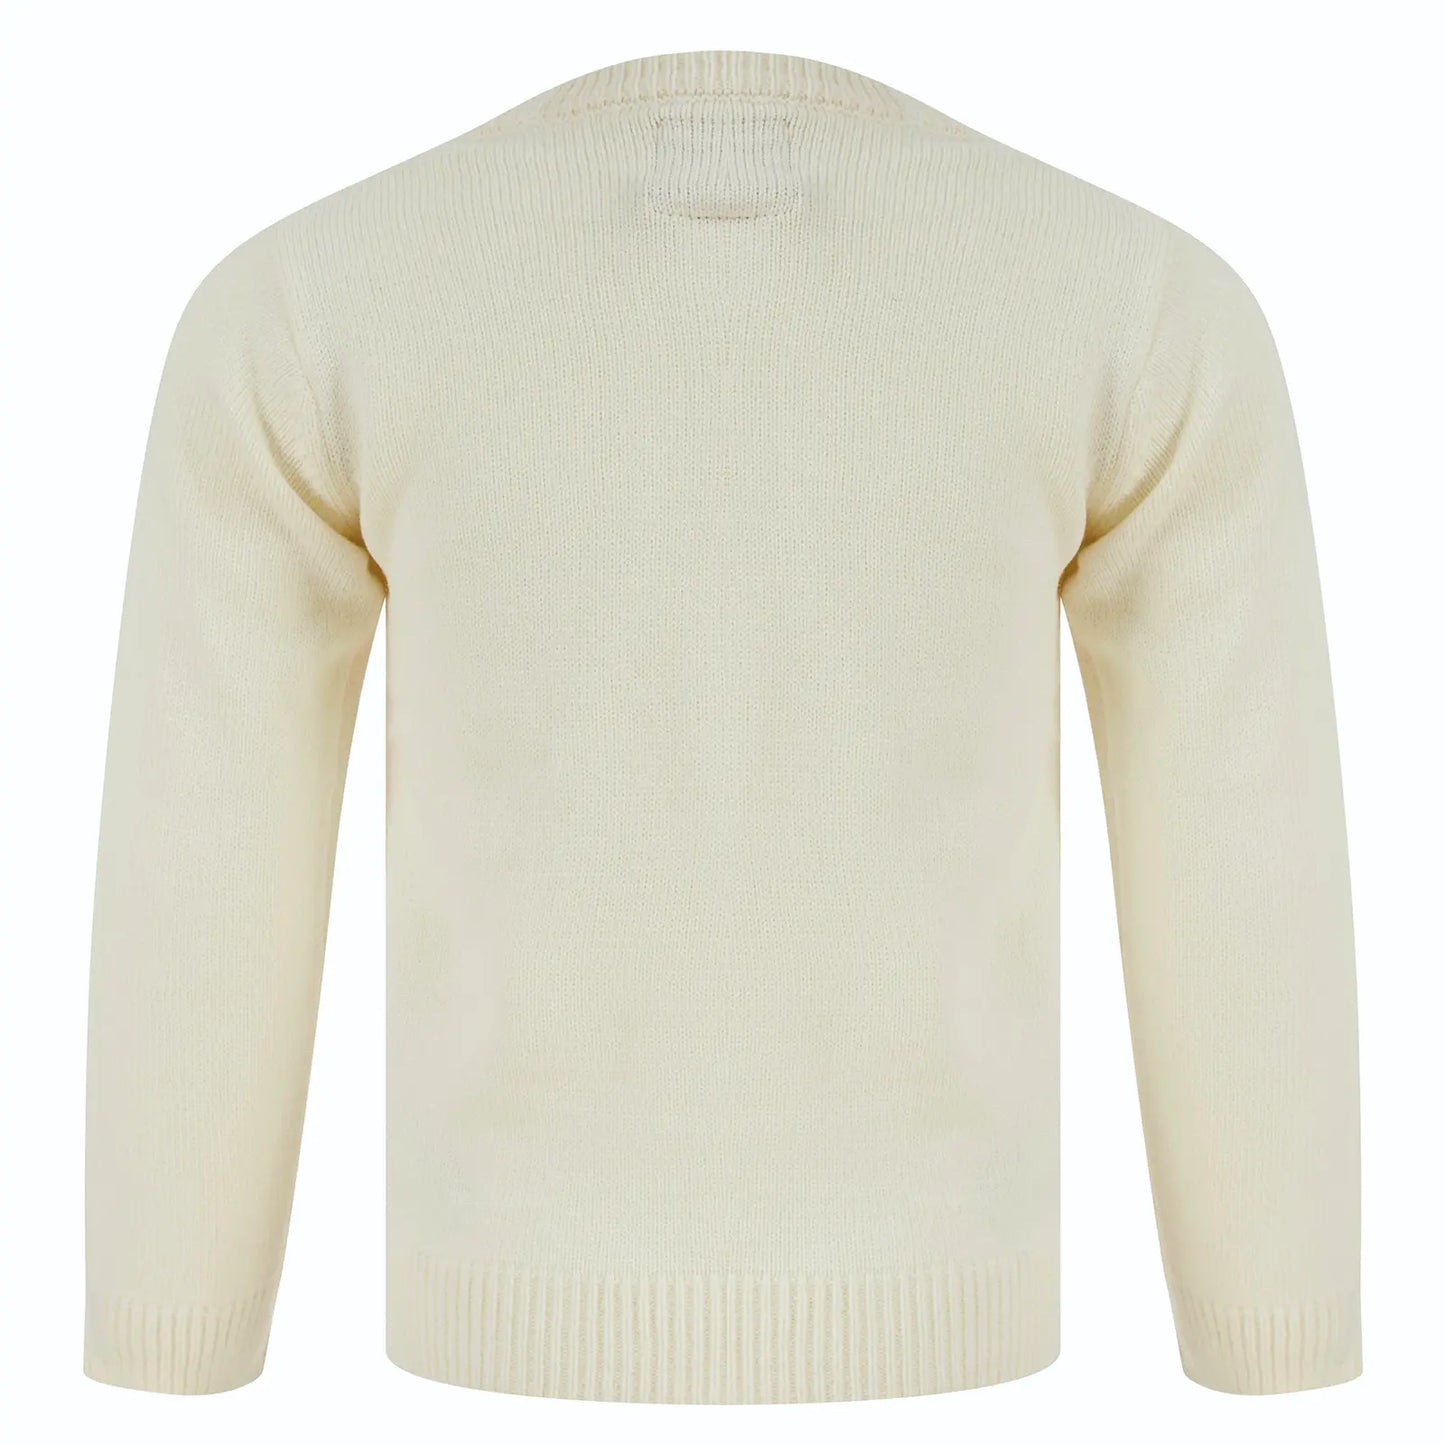 back view of cream knit christmas jumper with tapered cuffs and crew neck